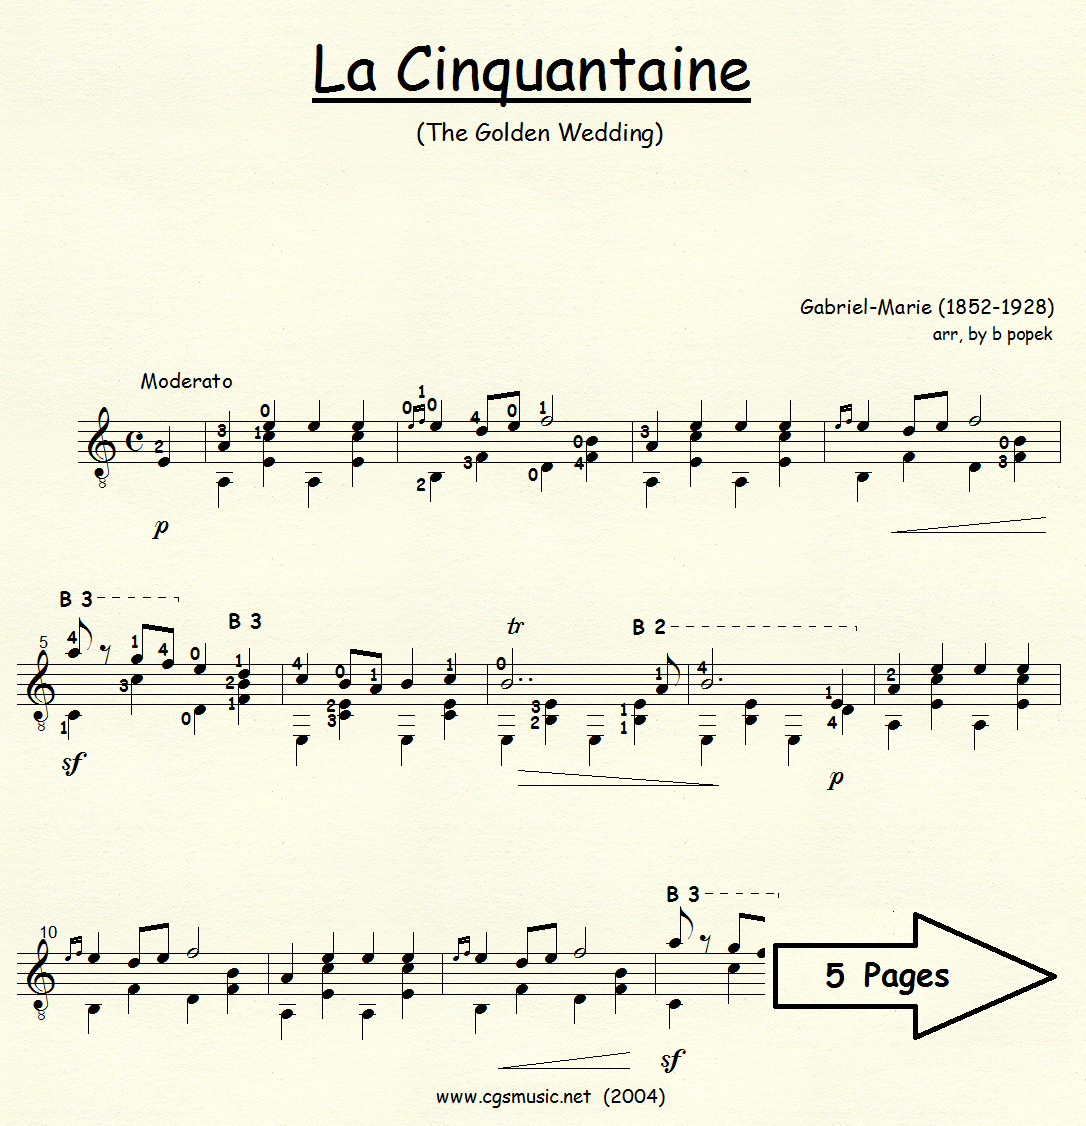 La Cinquantaine The Golden Wedding (Gabriel-Marie) for Classical Guitar in Standard Notation